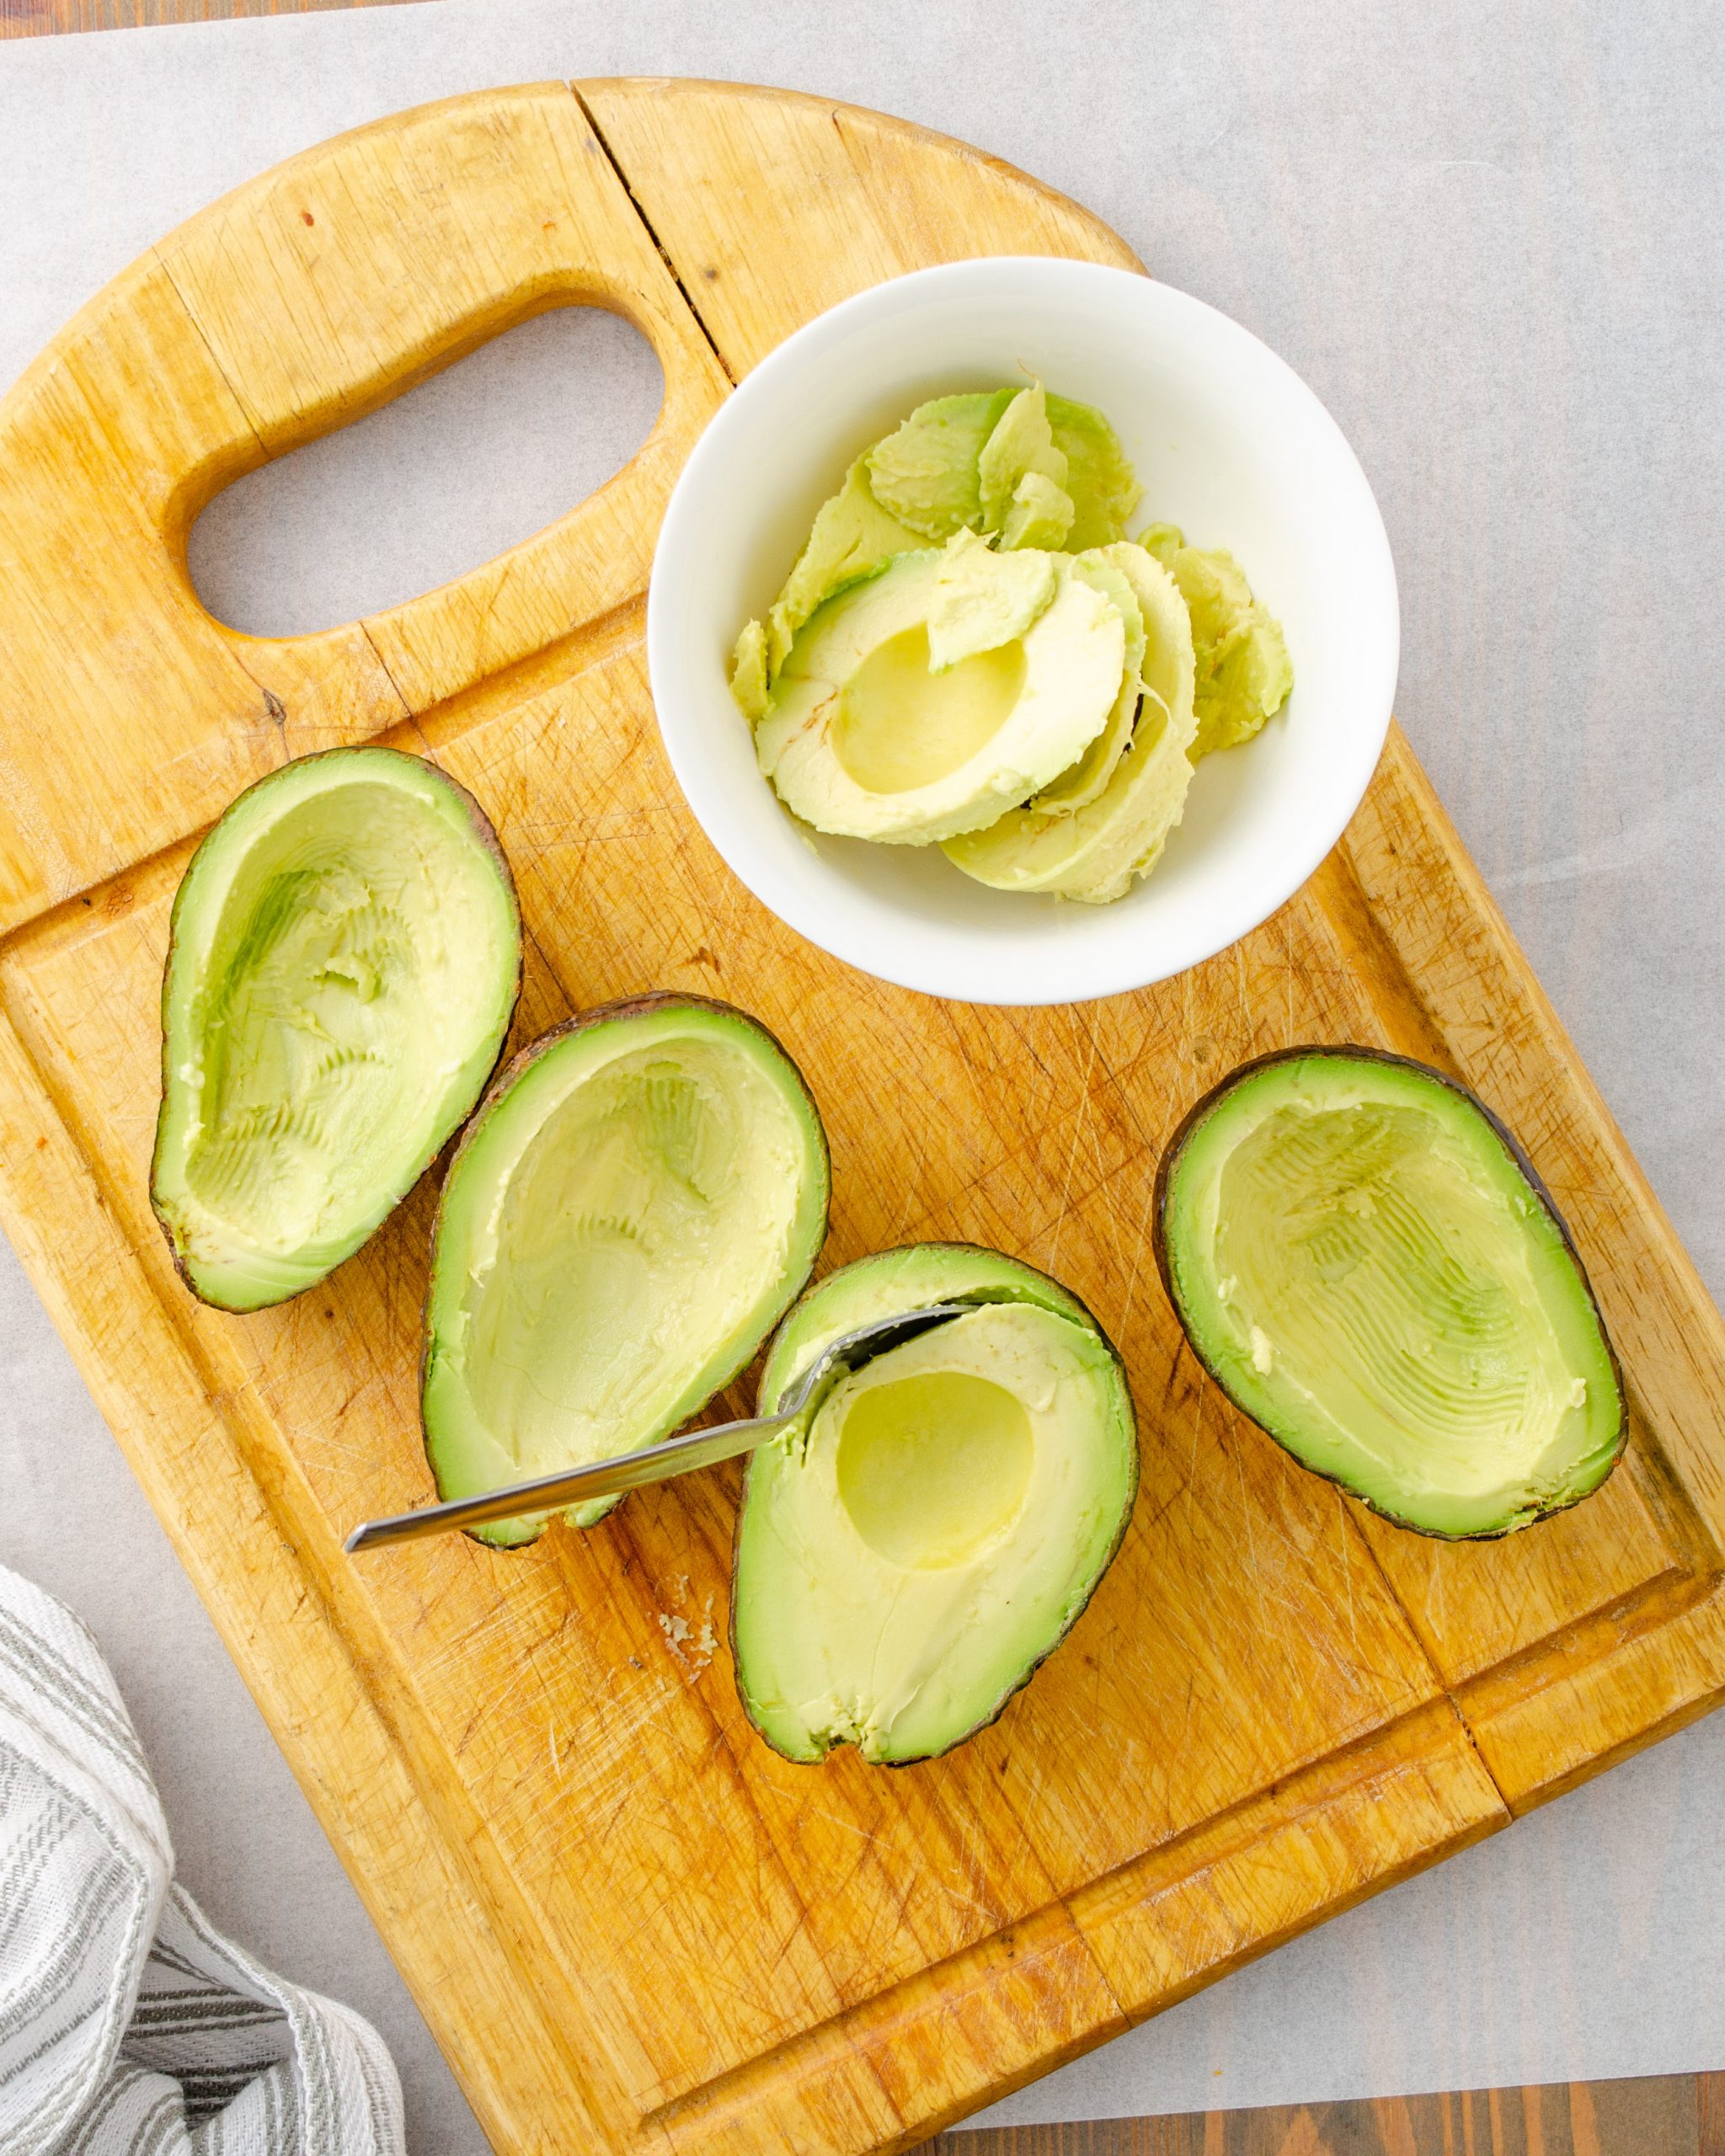 Scoop out the flesh from the inside of the avocados.